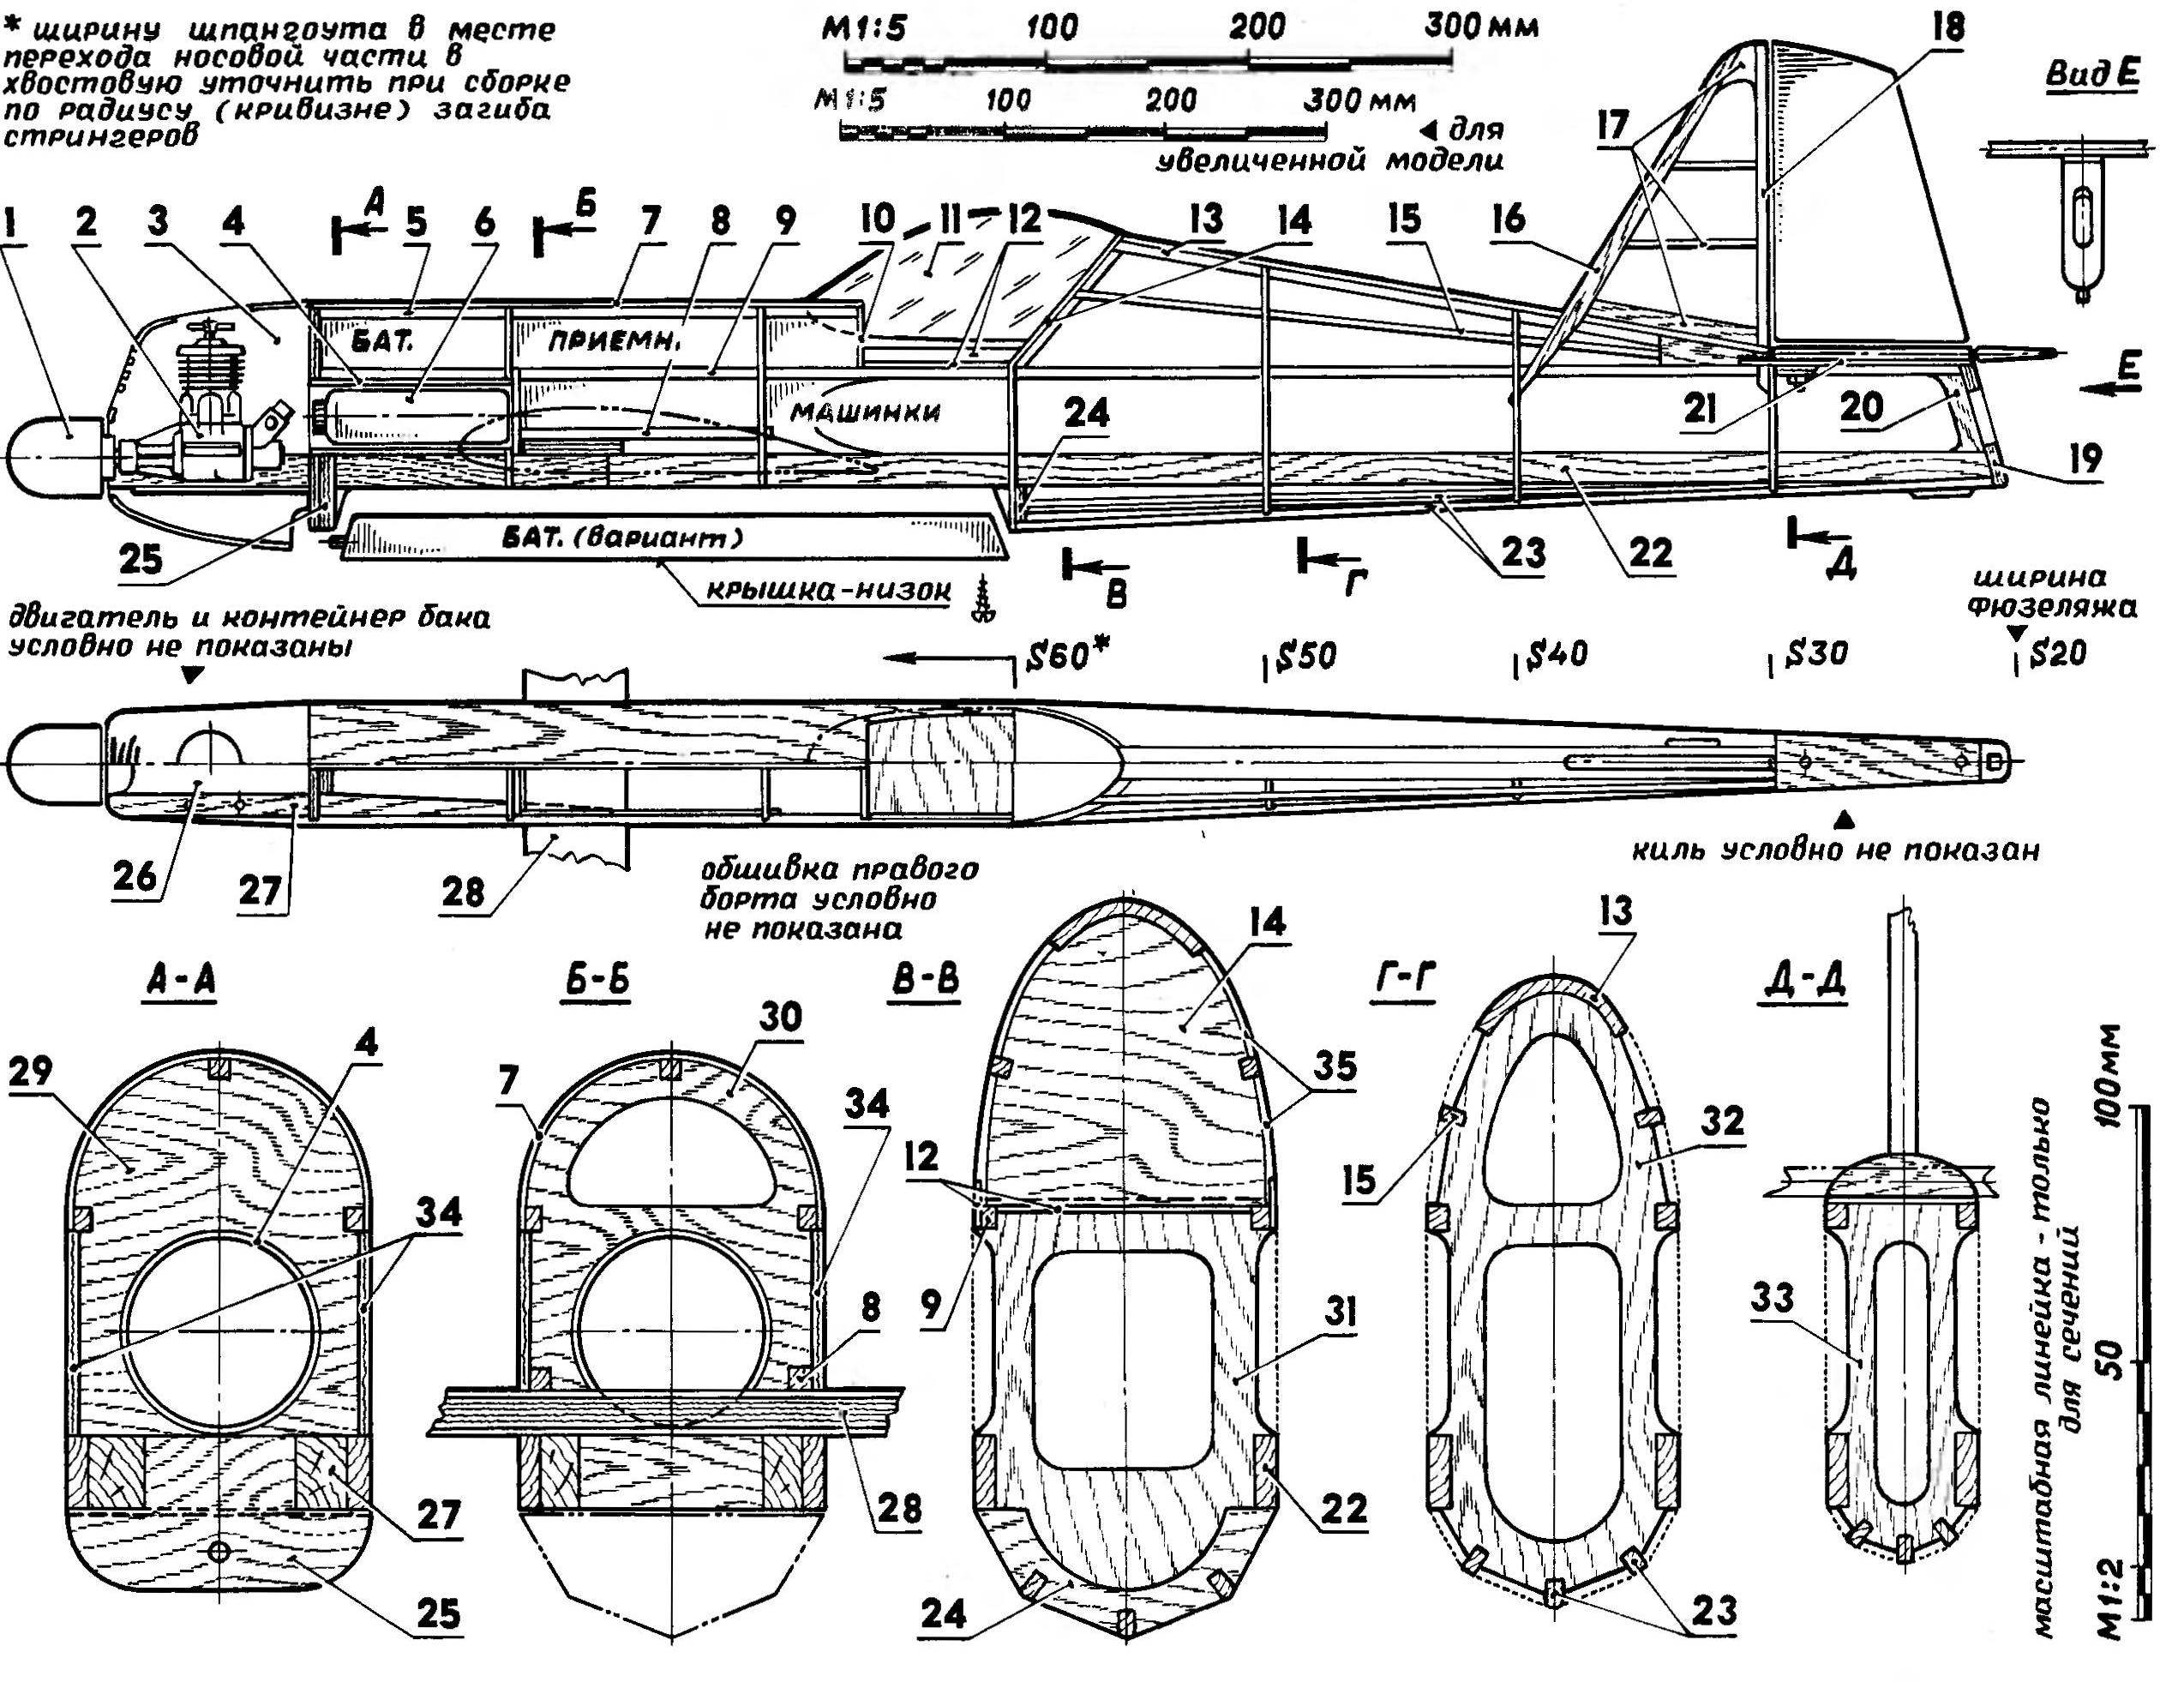 R and p. 2. The fuselage